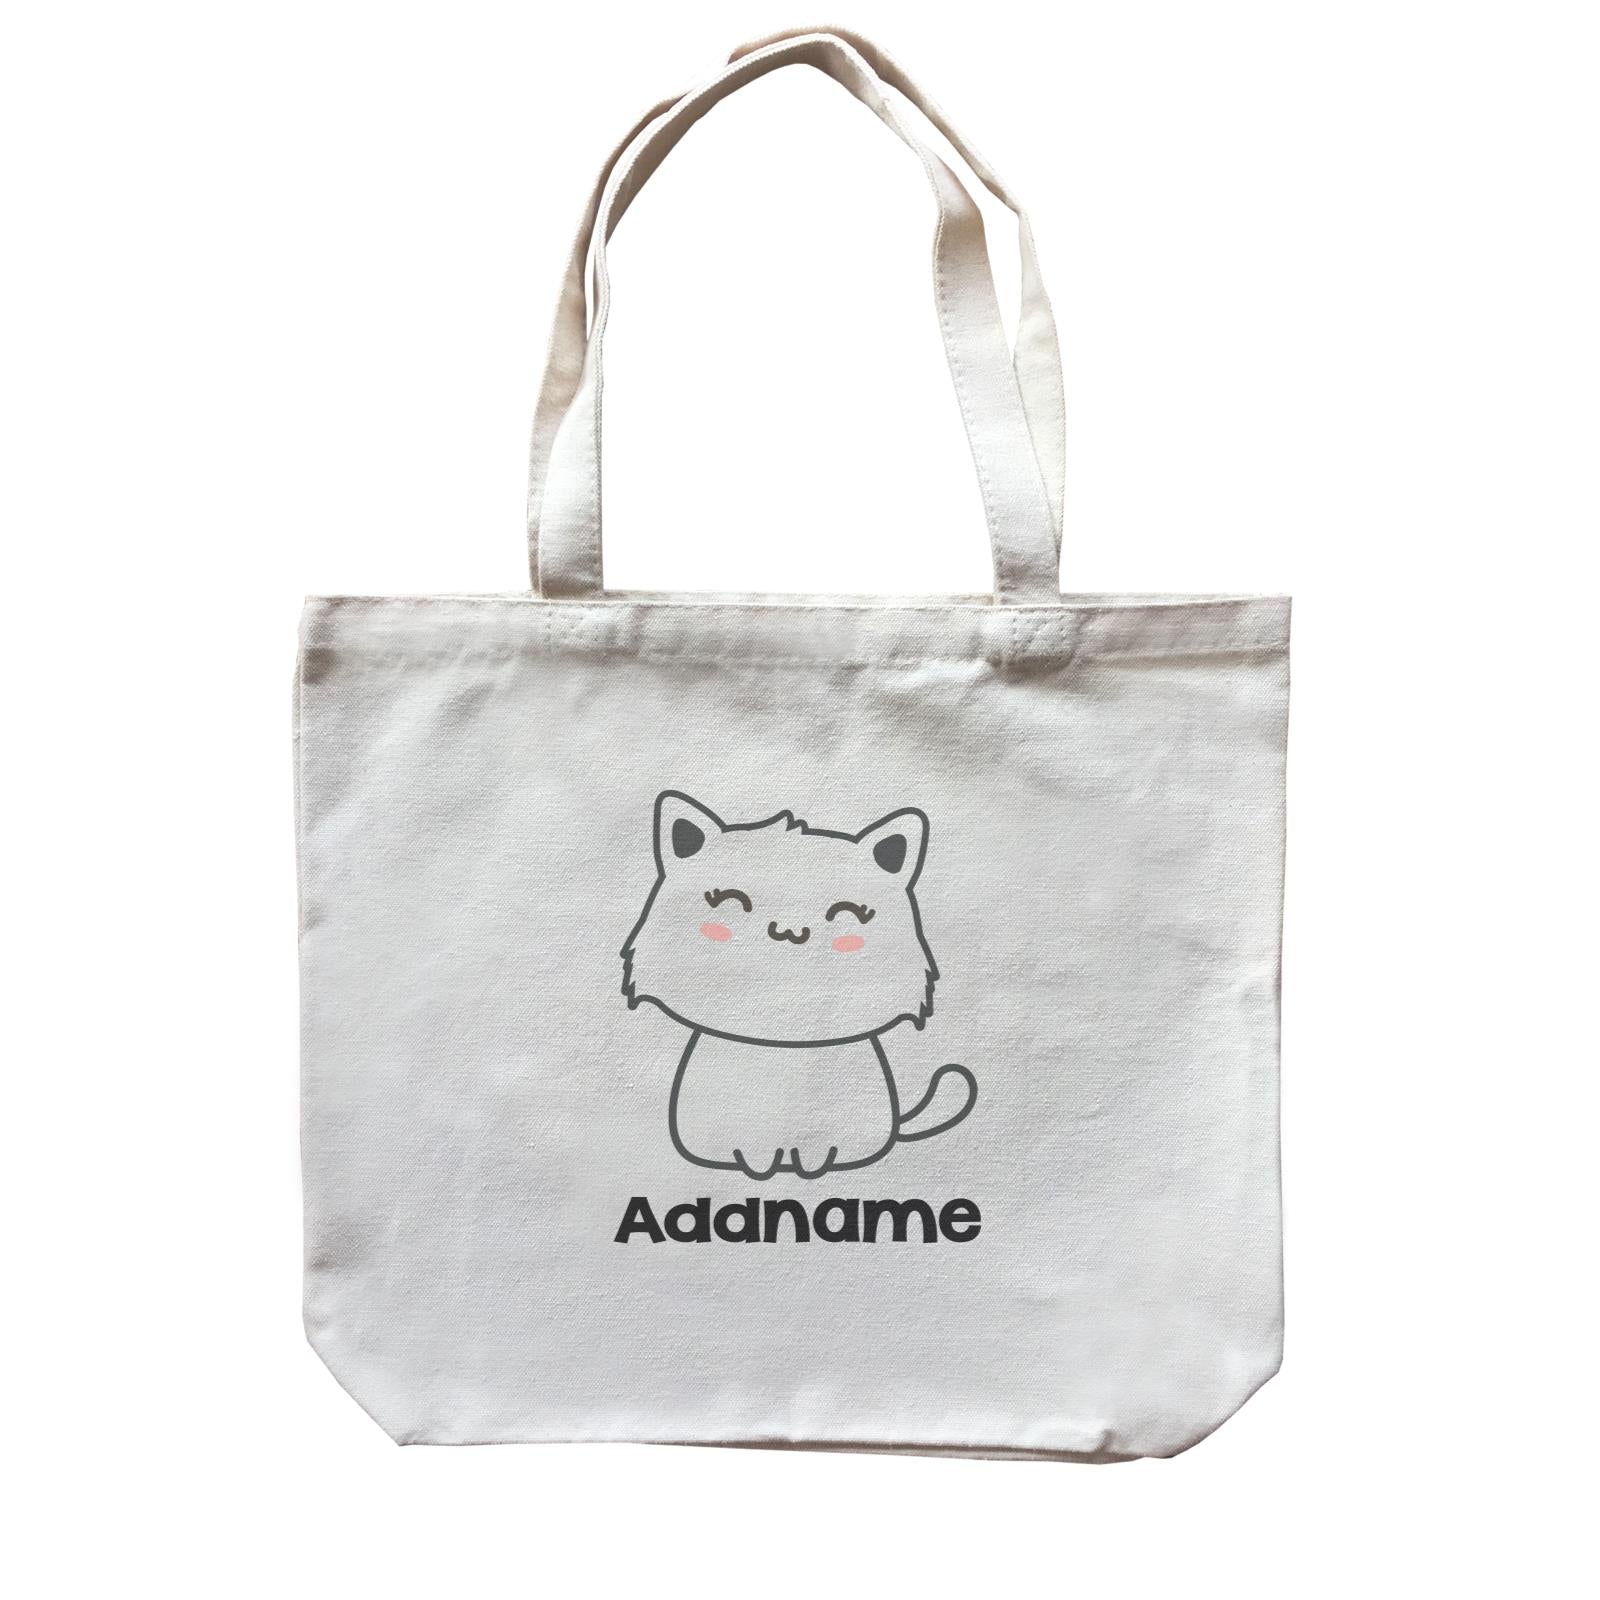 Drawn Adorable Cats White Addname Canvas Bag